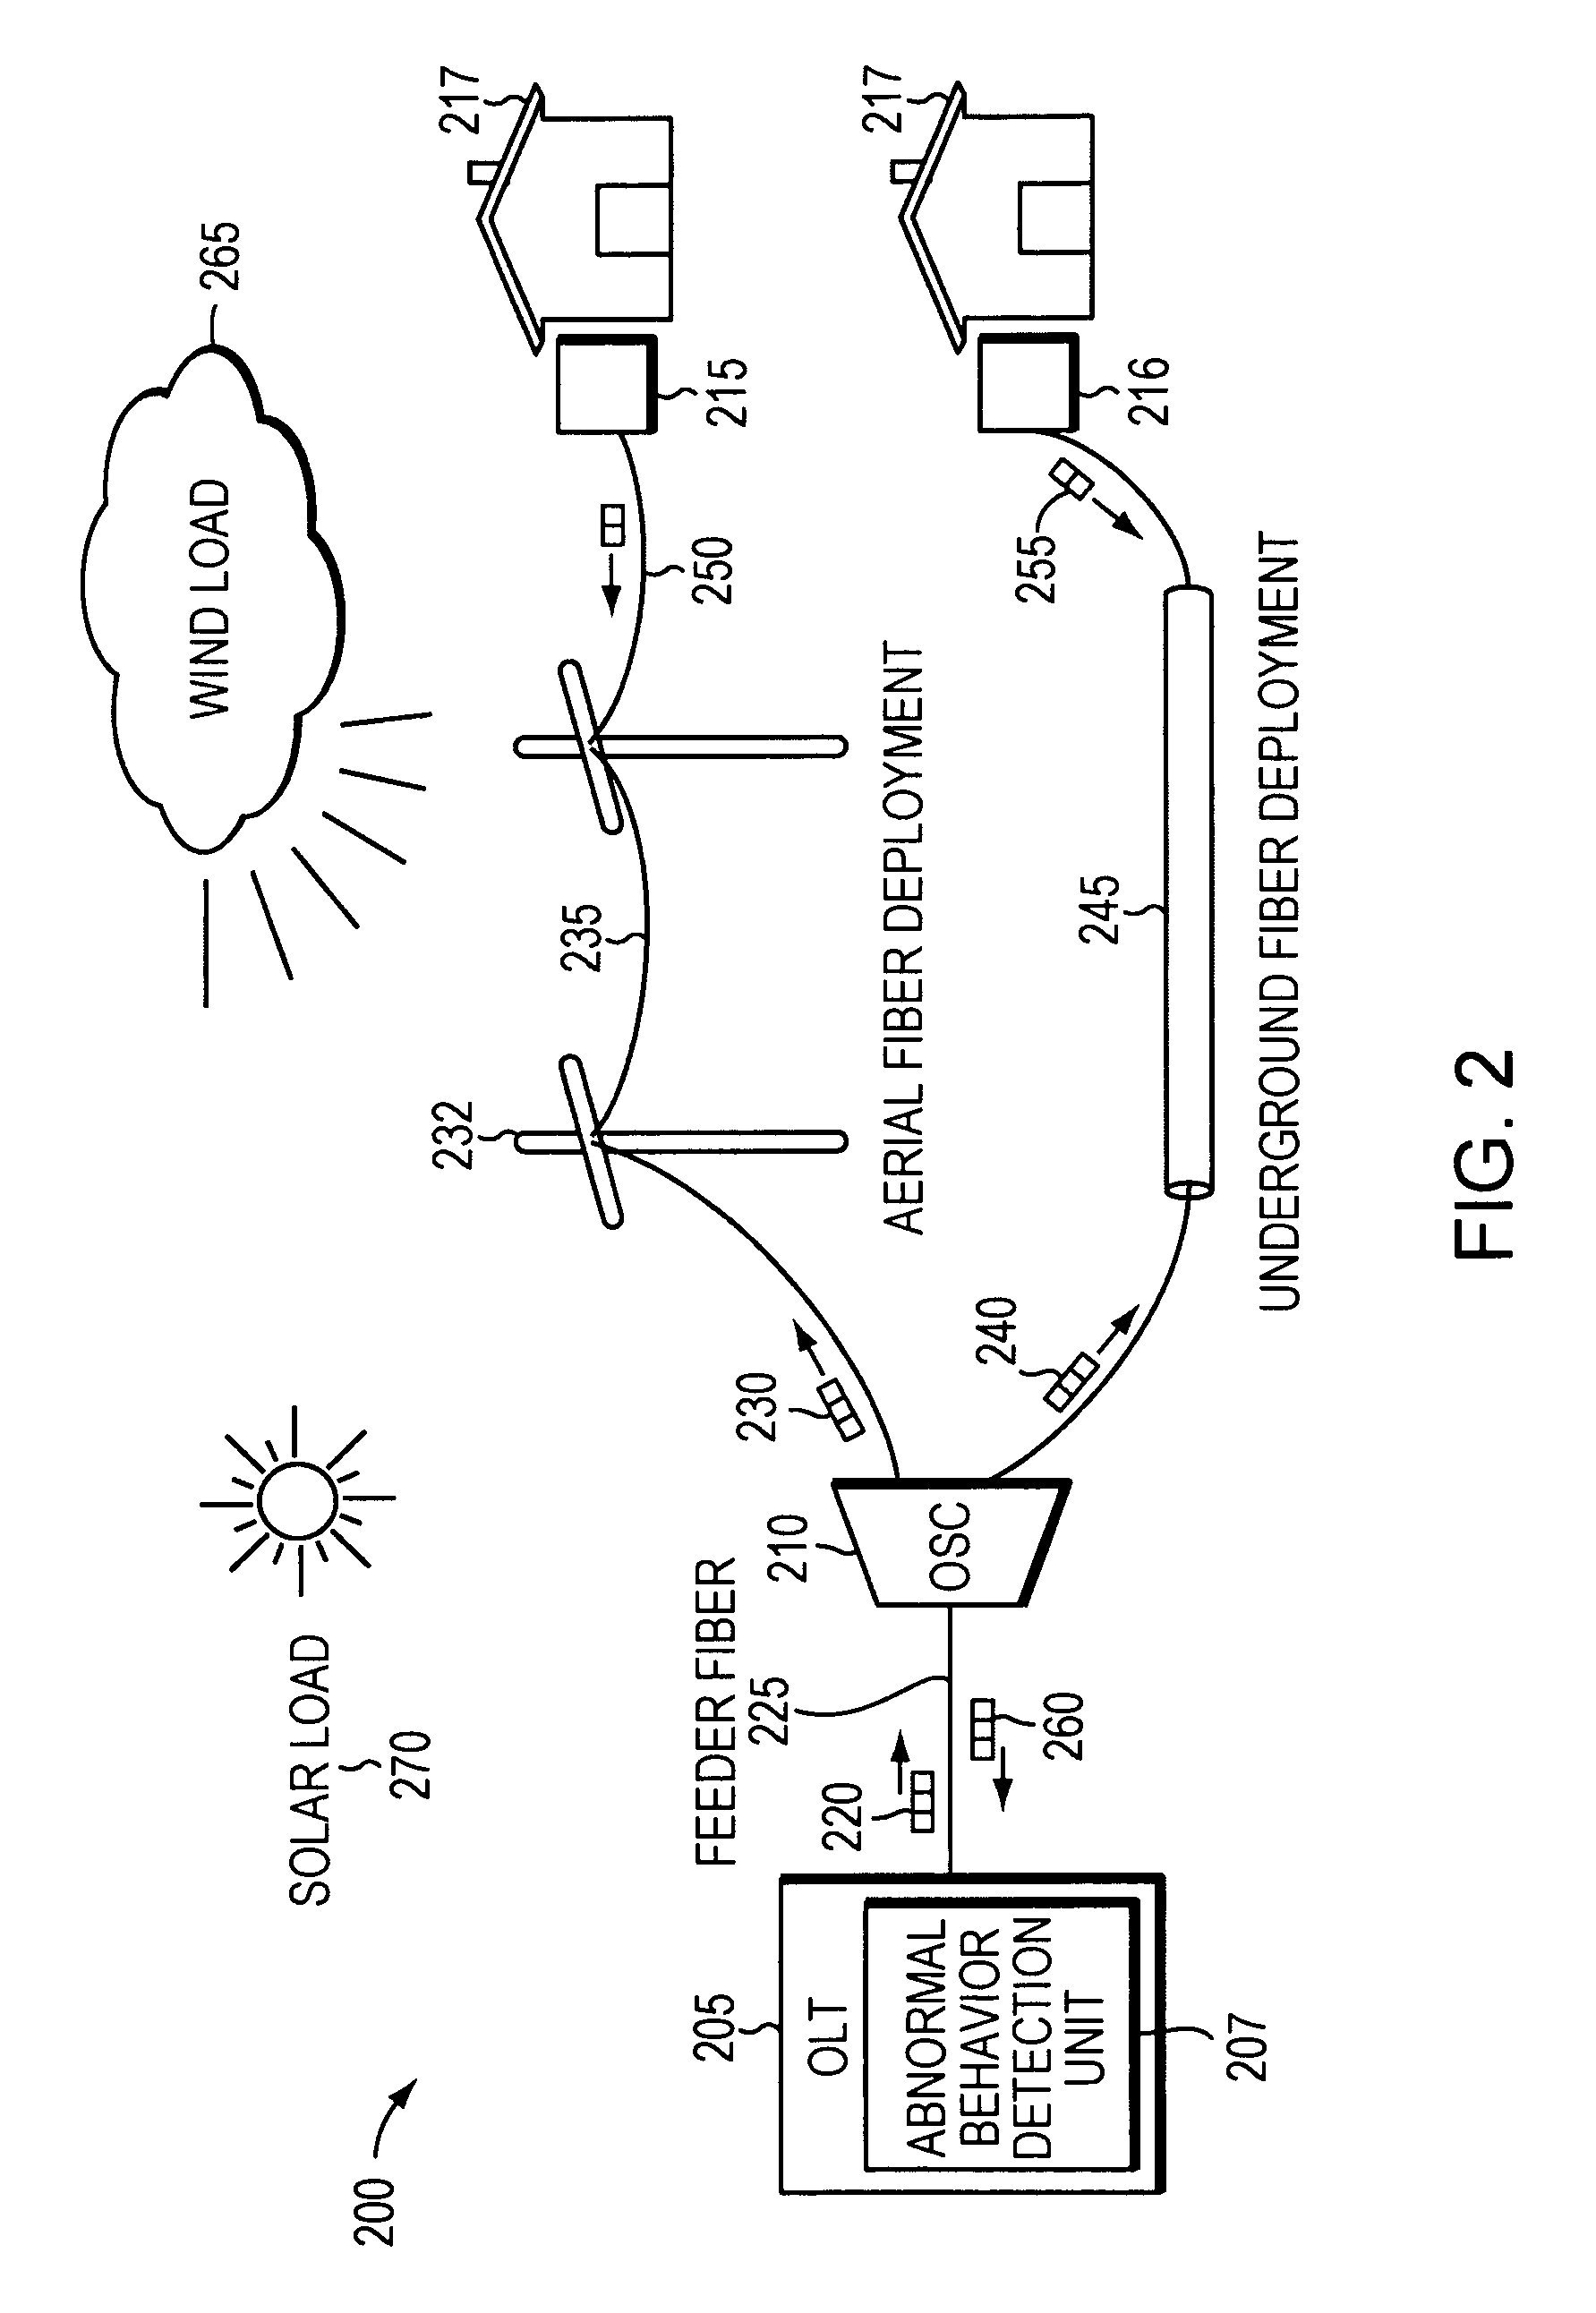 Method and apparatus of detecting abnormal behavior in a passive optical network (PON)